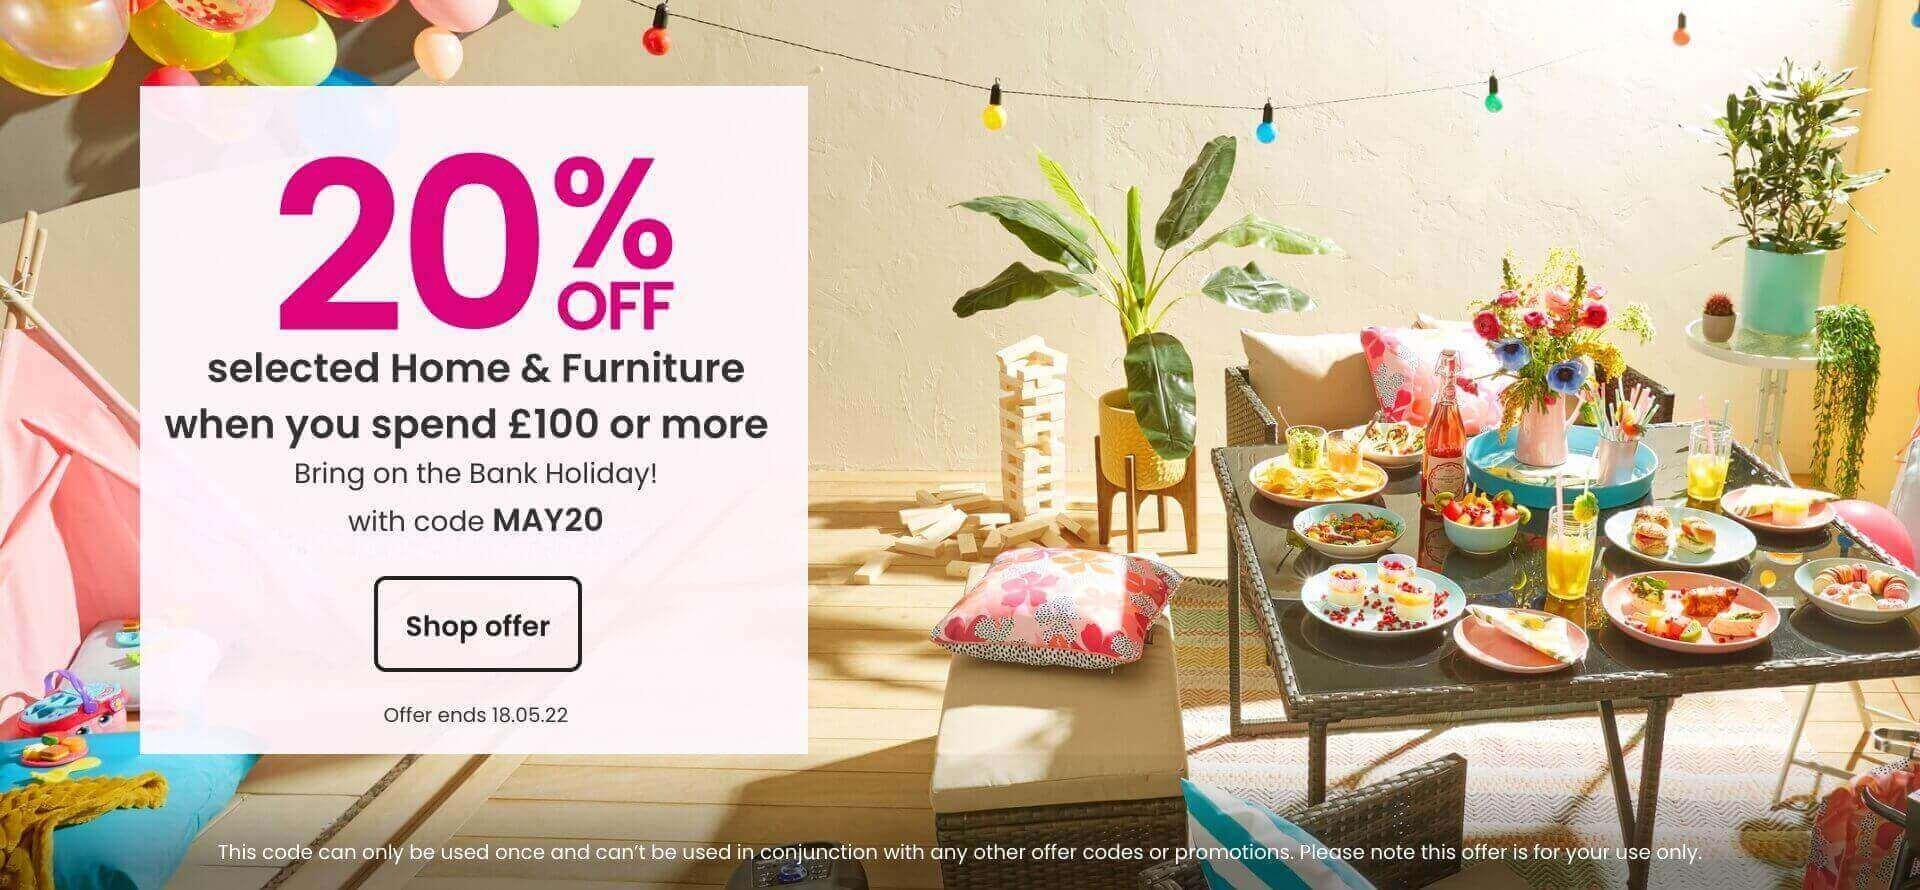 20% off selected Home & Furniture when you spend £100 or more